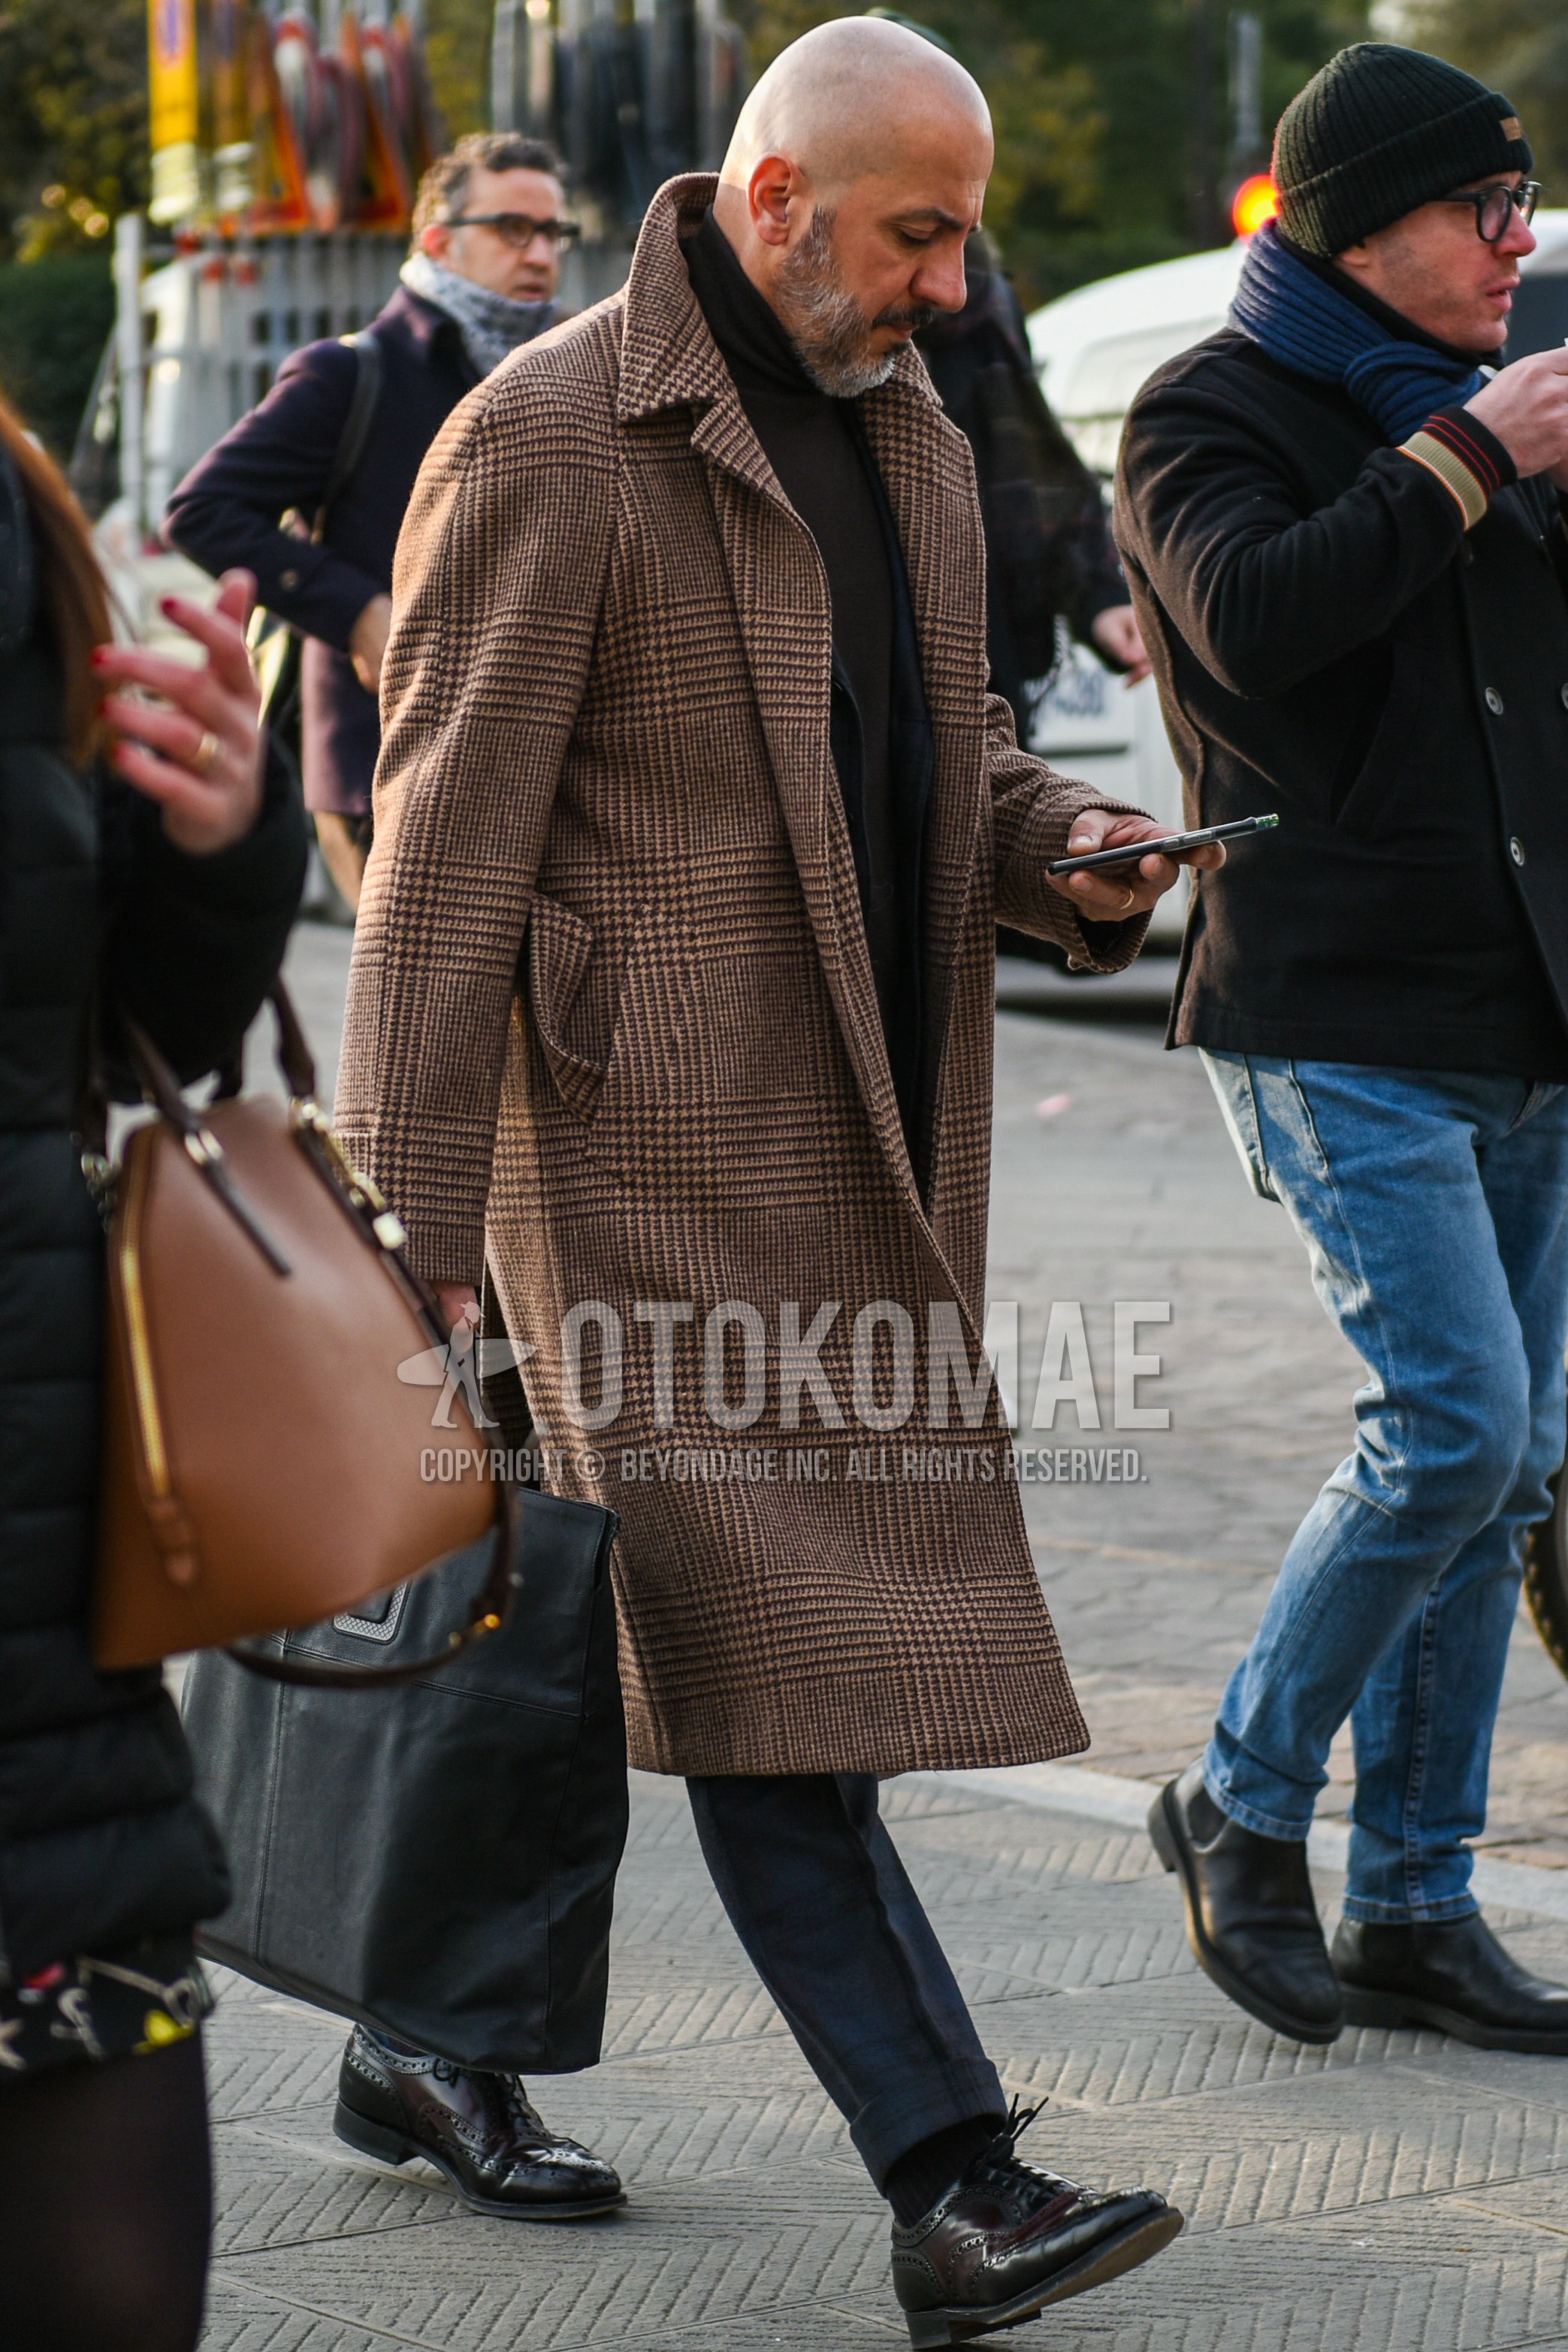 Men's autumn winter outfit with beige plain ulster coat, brown plain turtleneck knit, gray check slacks, navy plain socks, brown wing-tip shoes leather shoes.